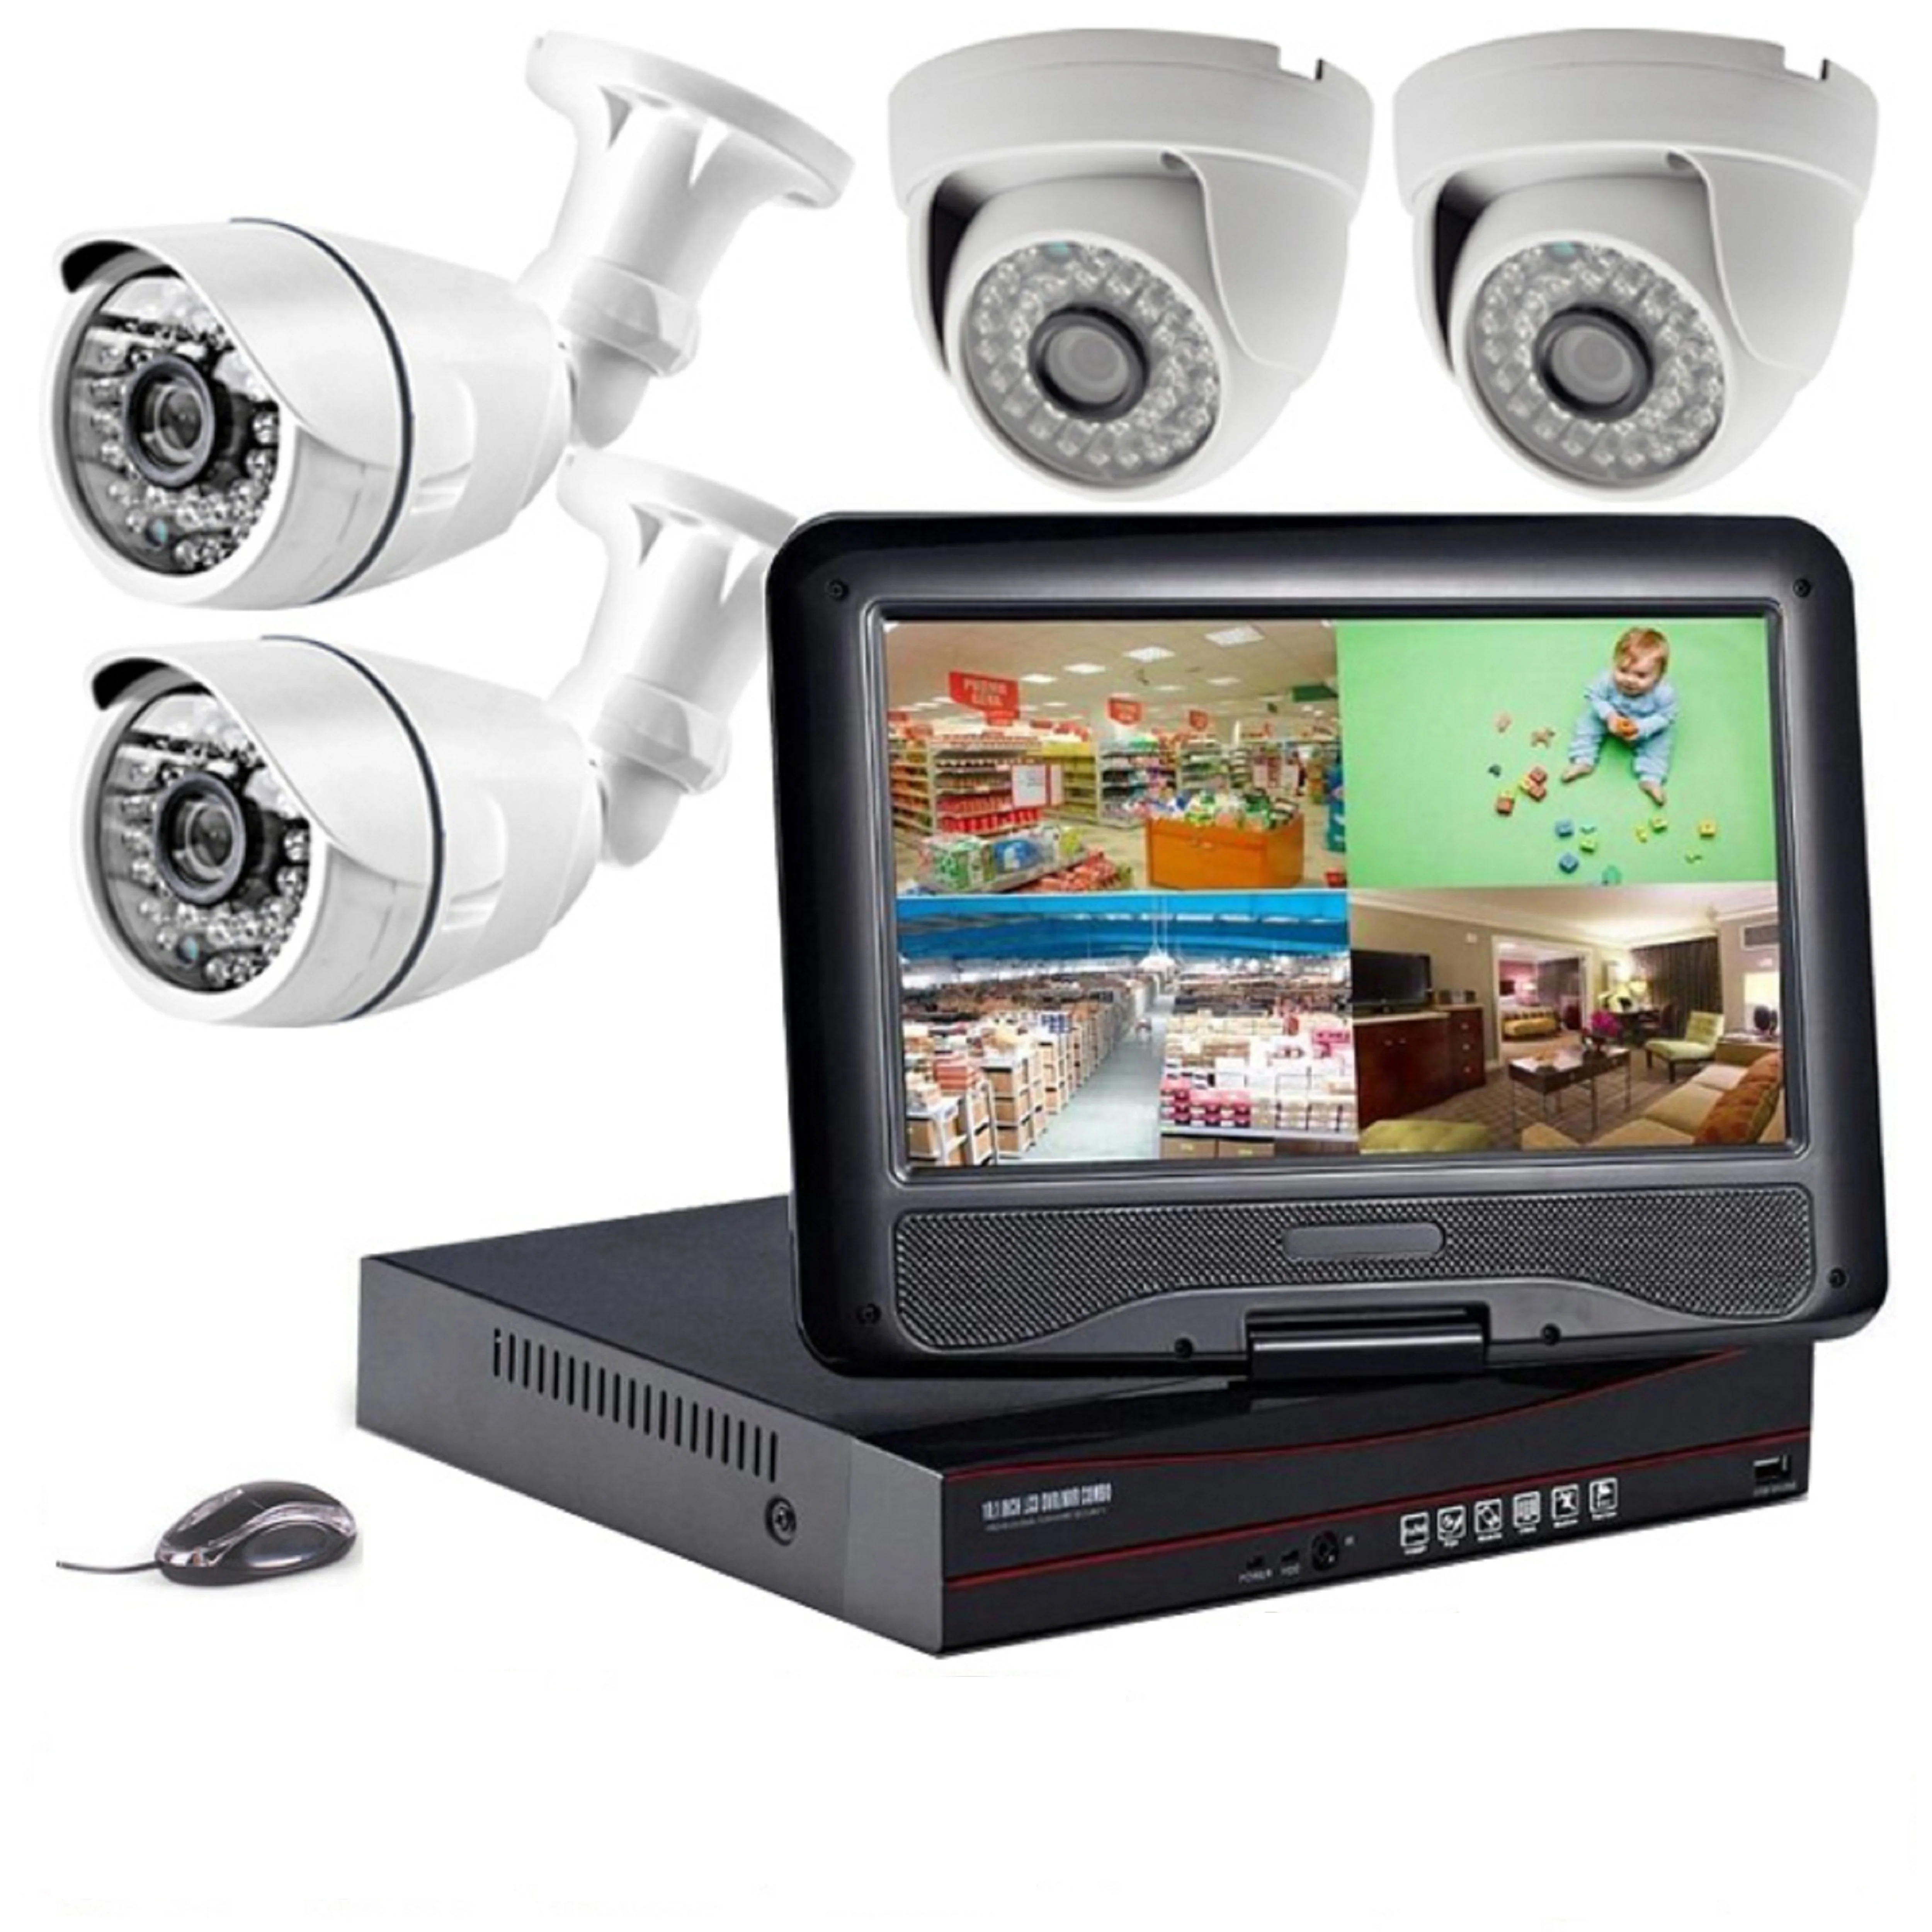 Hot Sell Security System!!! Economic 